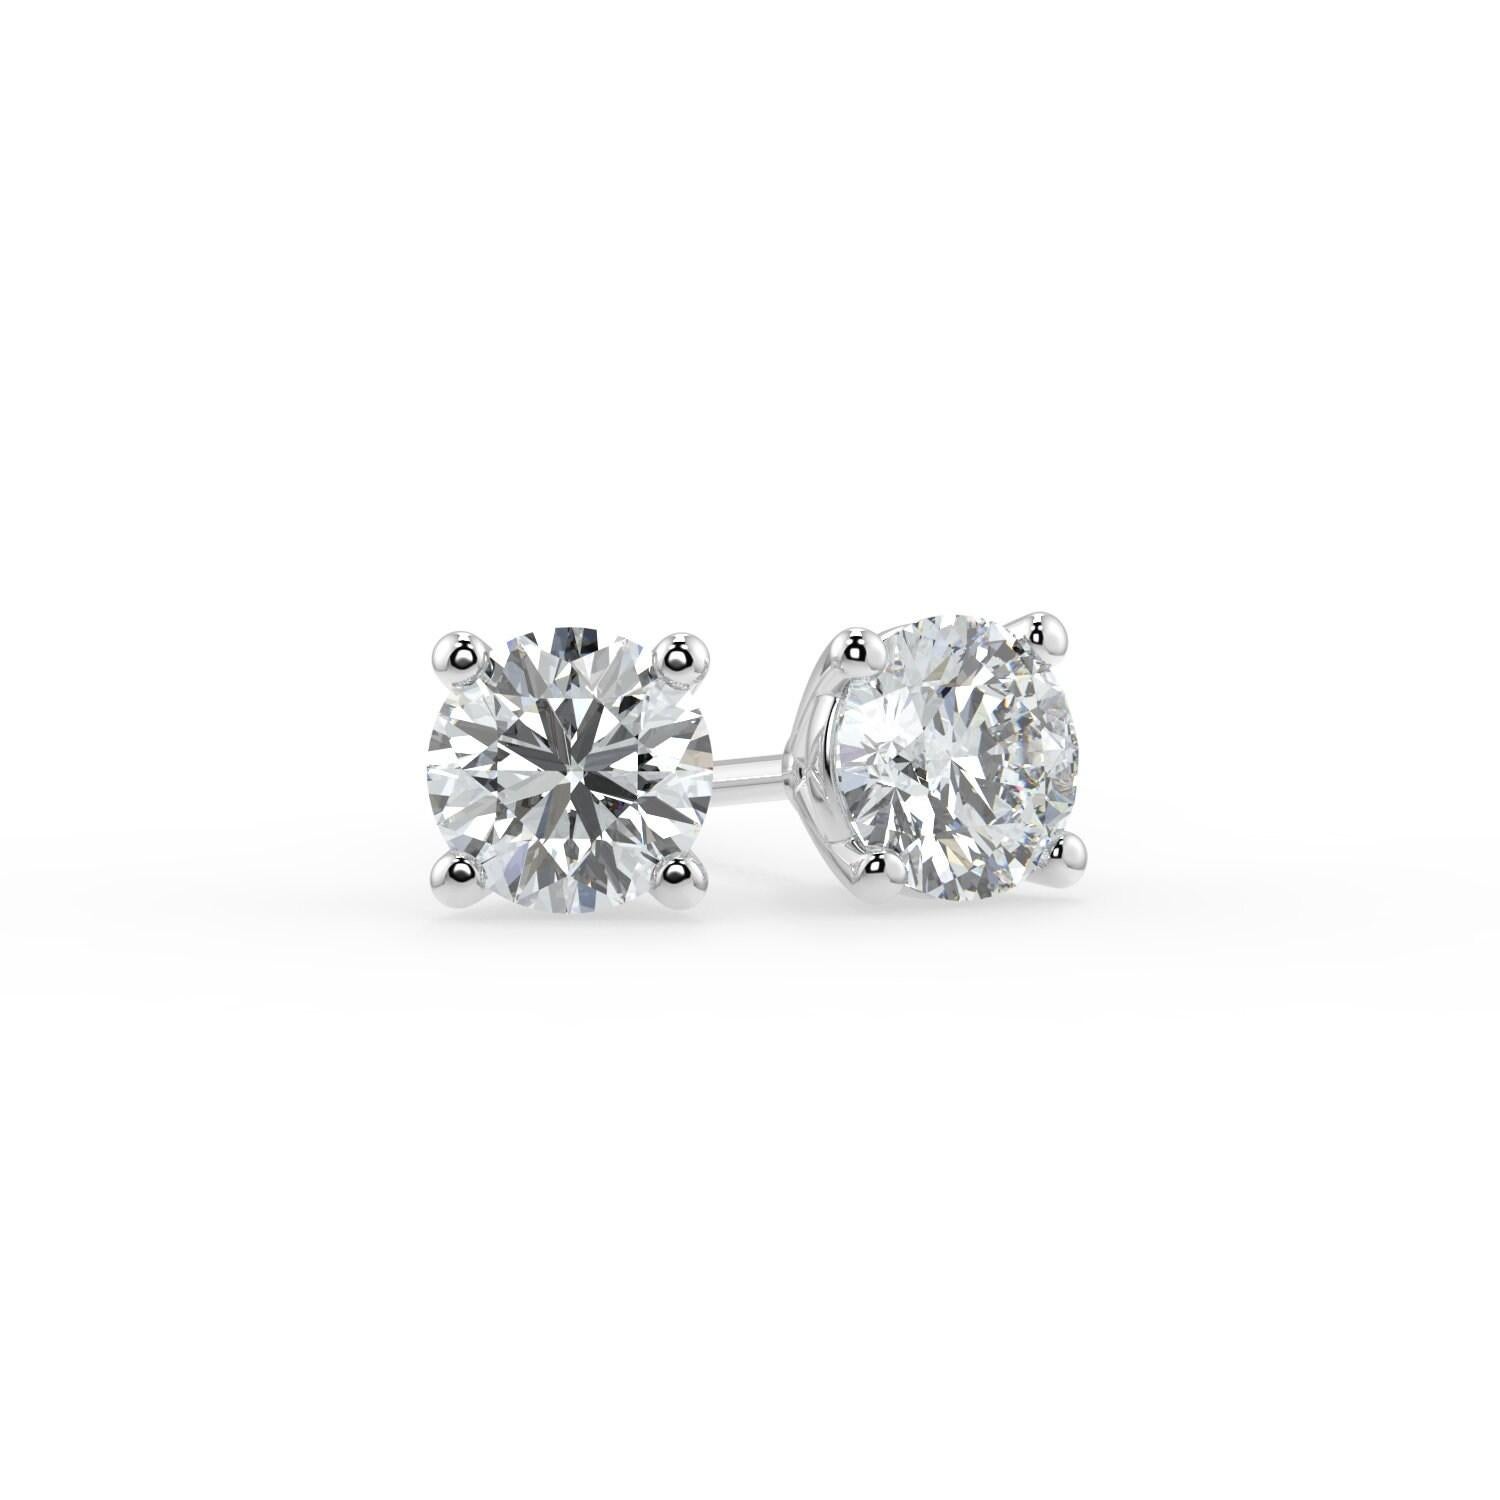 0.75 Ct Natural  Diamond SI Clarity Round Shape Solitaire 4 Prong Martini Style Unisex Studs with Butterfly Pushbacks 14K White Gold 

Specifications:
Metal: 14k White Gold 
Diamond Shape: Round
Natural Diamond carat weight: 0.75 CTW 
Diamond